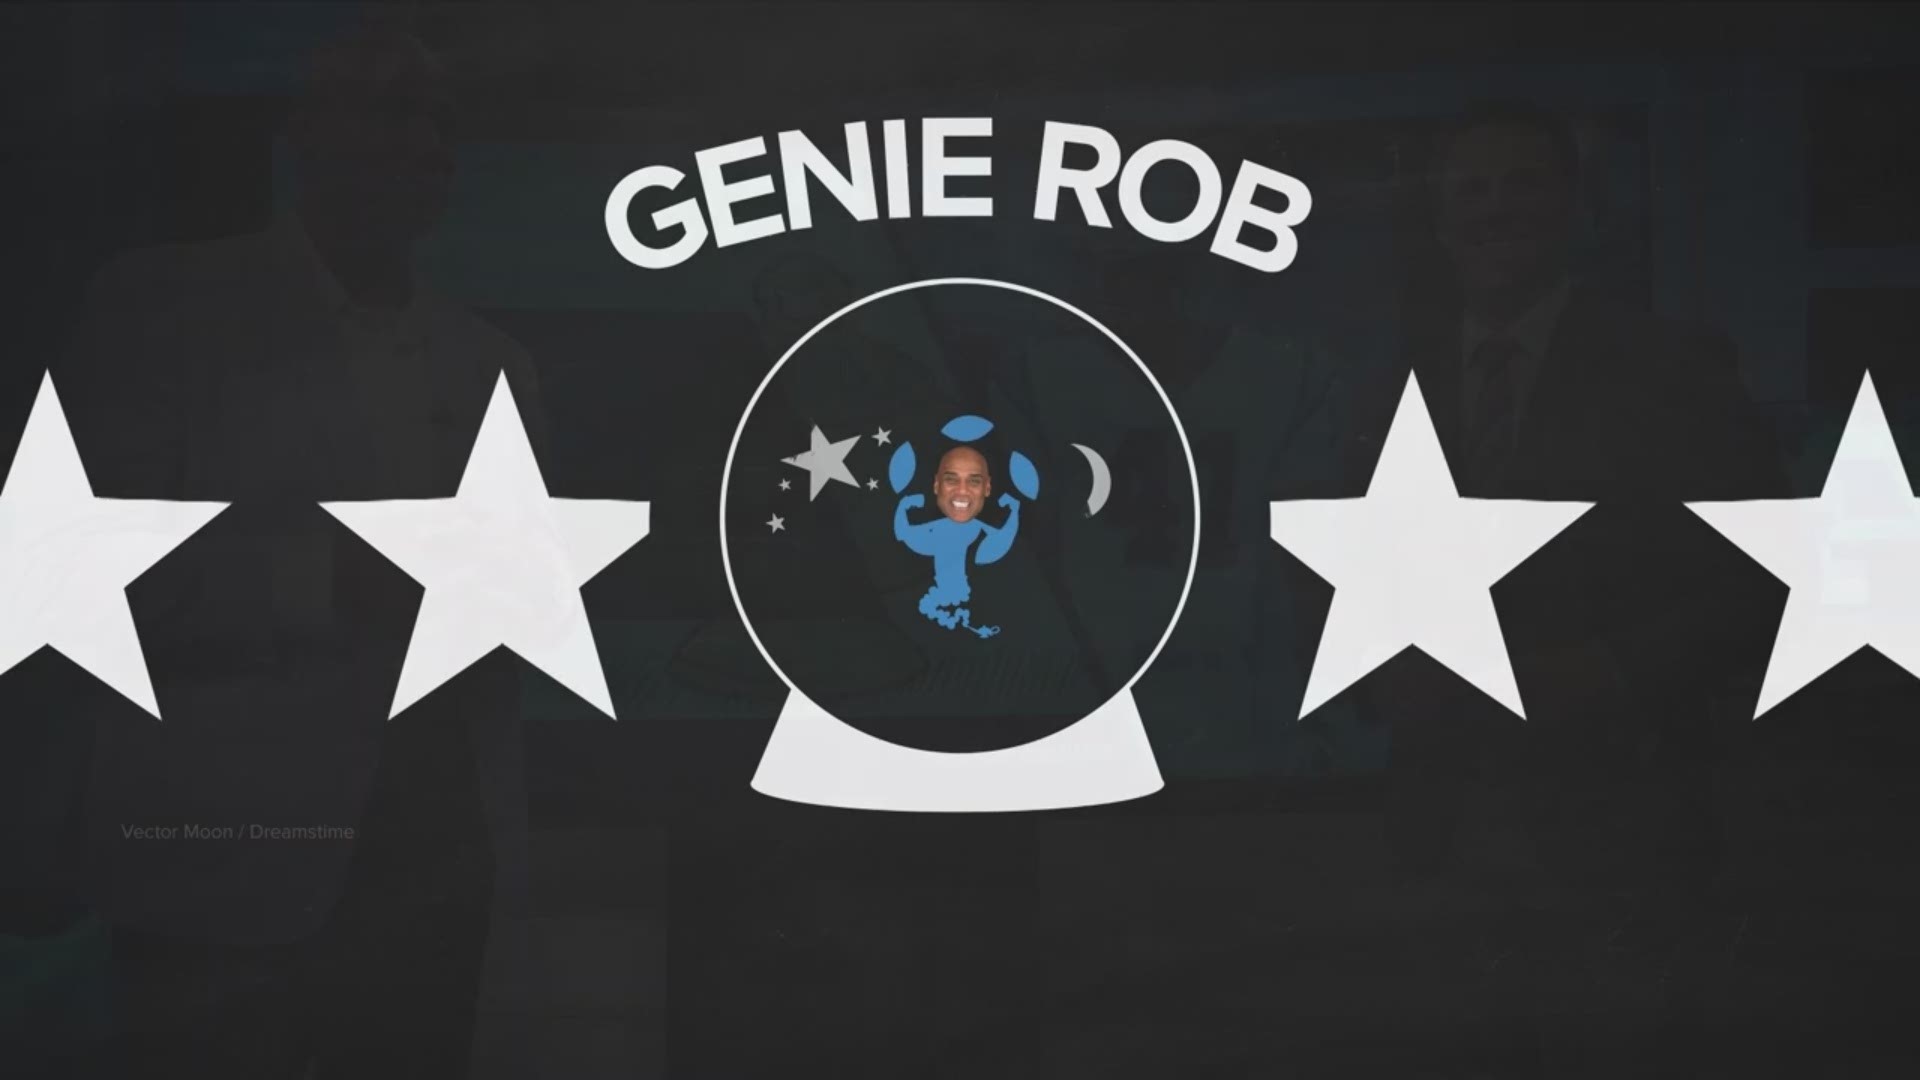 Former NFL safety Eugene Robinson grants Carolina Panthers fans three wishes after the team's week 1 loss to the Rams. From Cam Newton's accuracy to a much-needed pass rush, "Genie Rob" says things will be much better in Week 2 vs Tampa Bay.